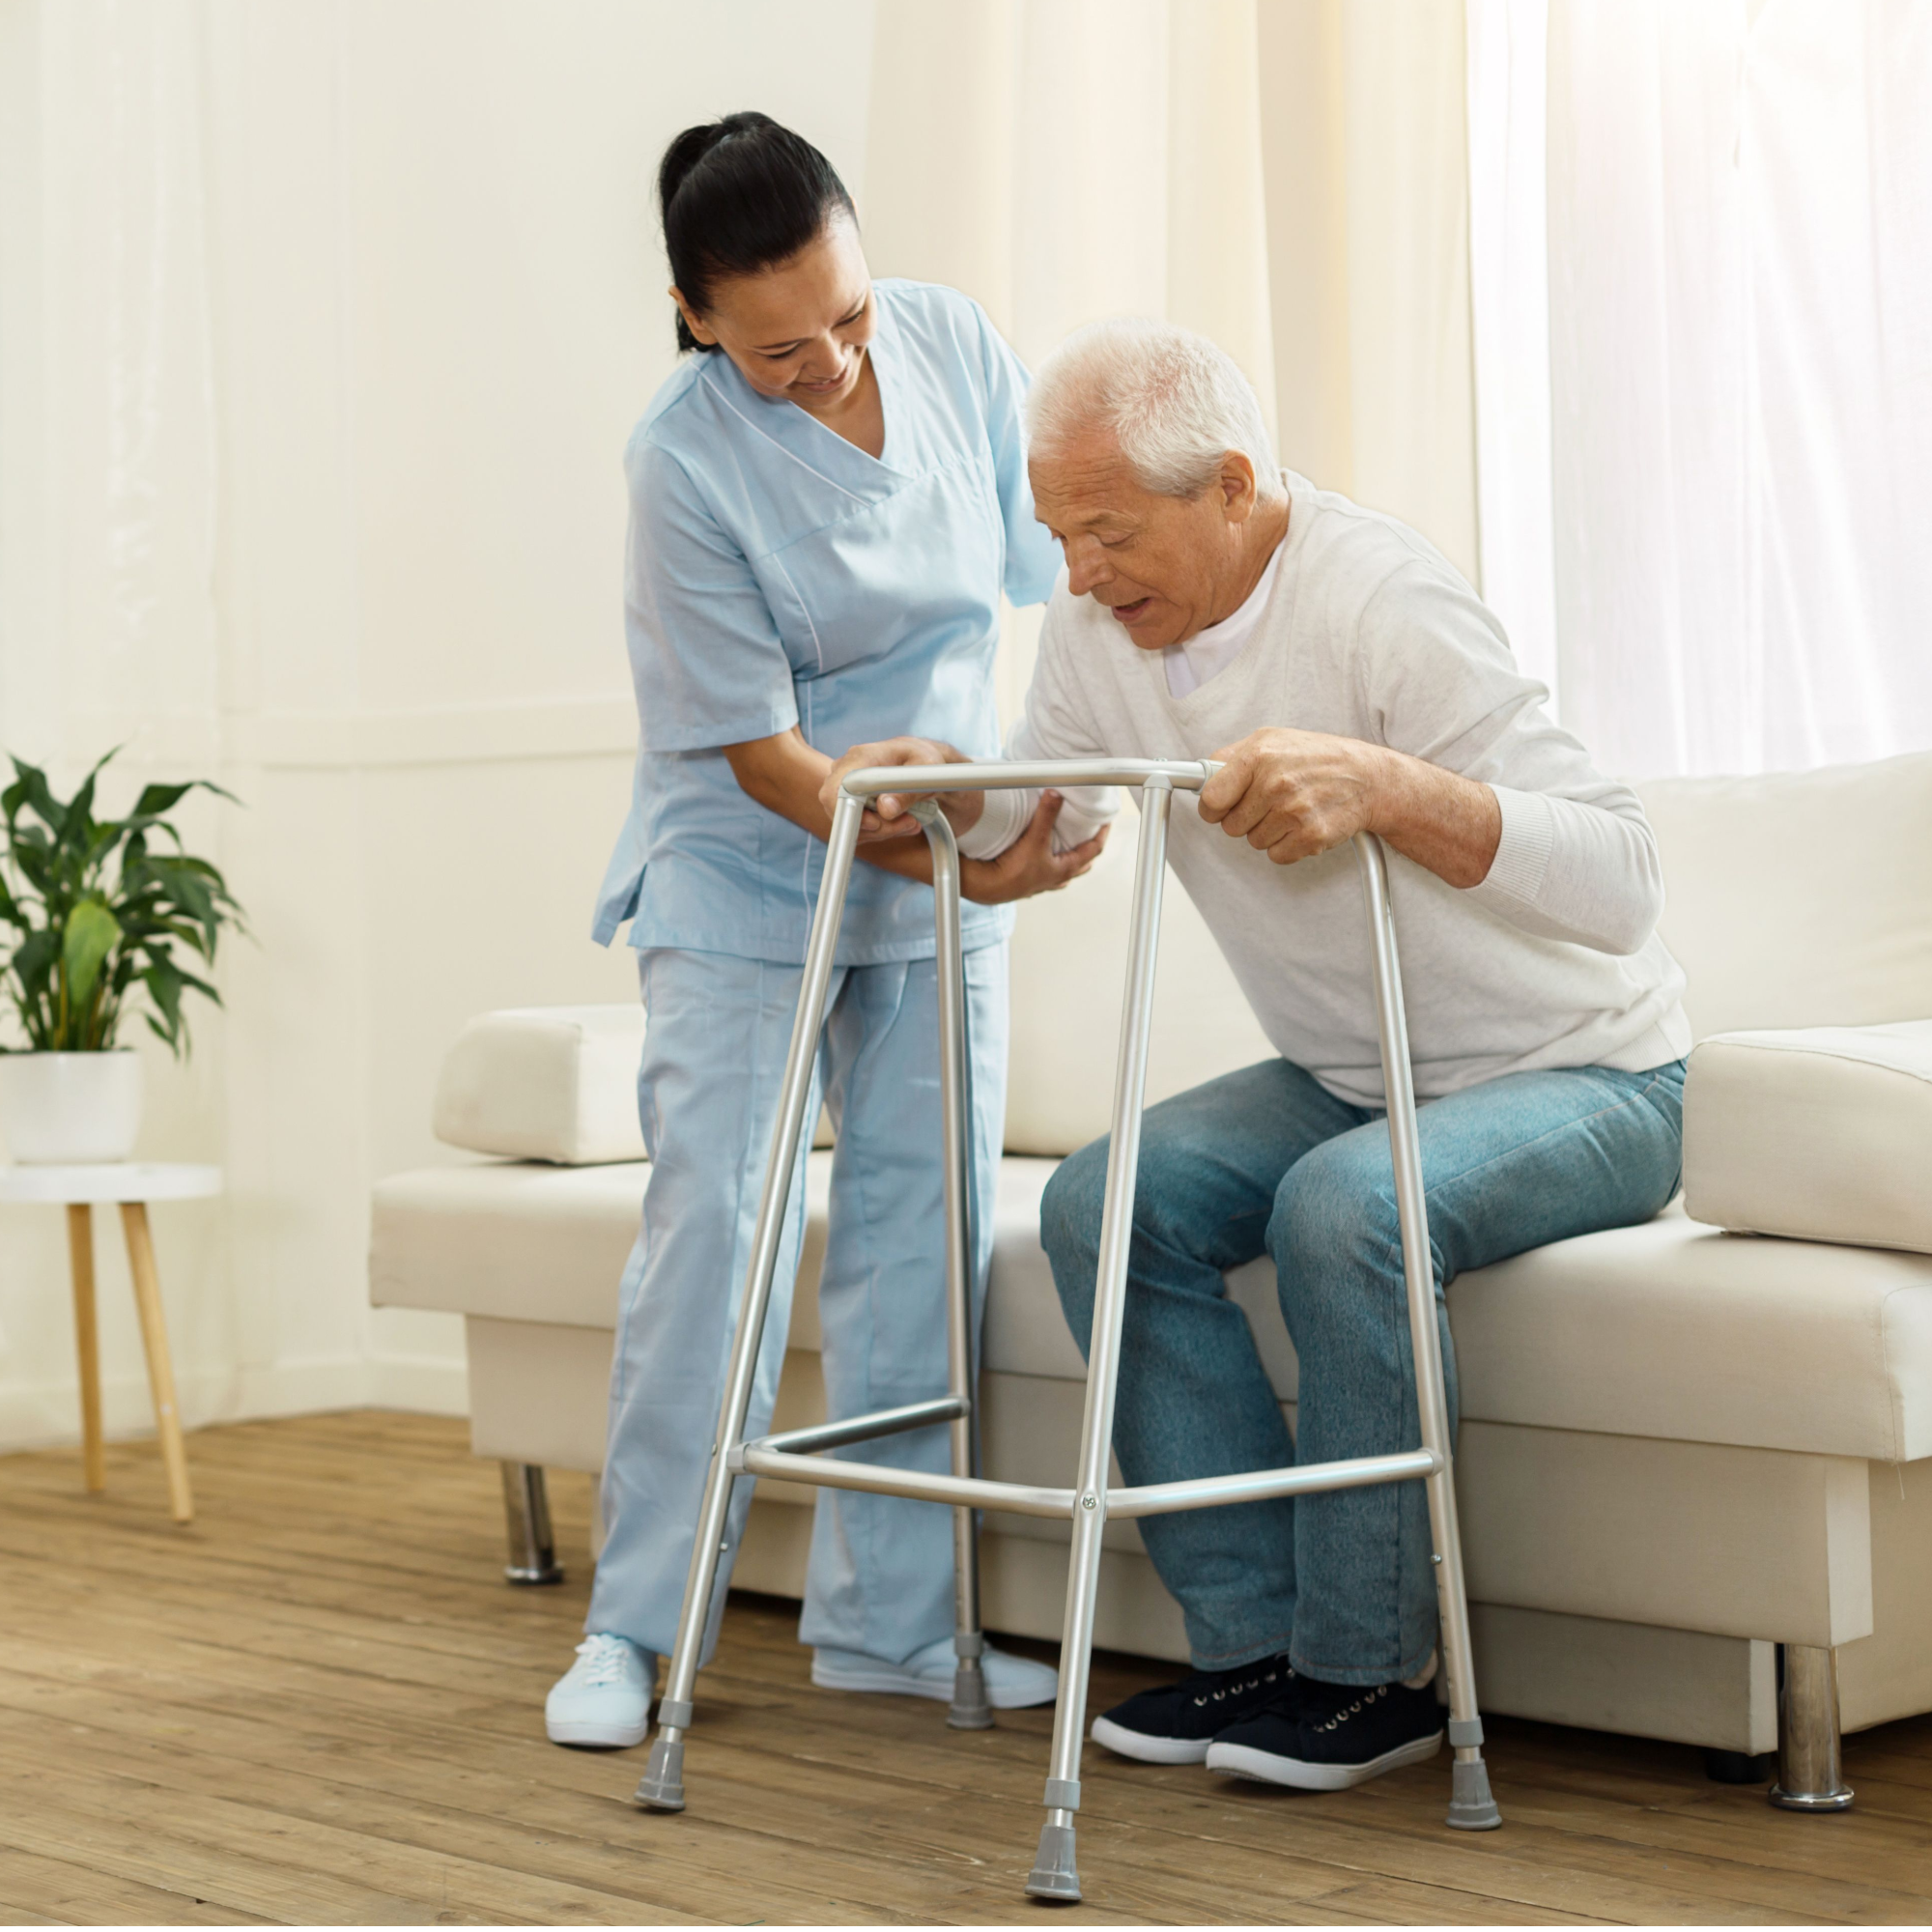 An in home caregiver assists a man struggling to get up from a sitting position